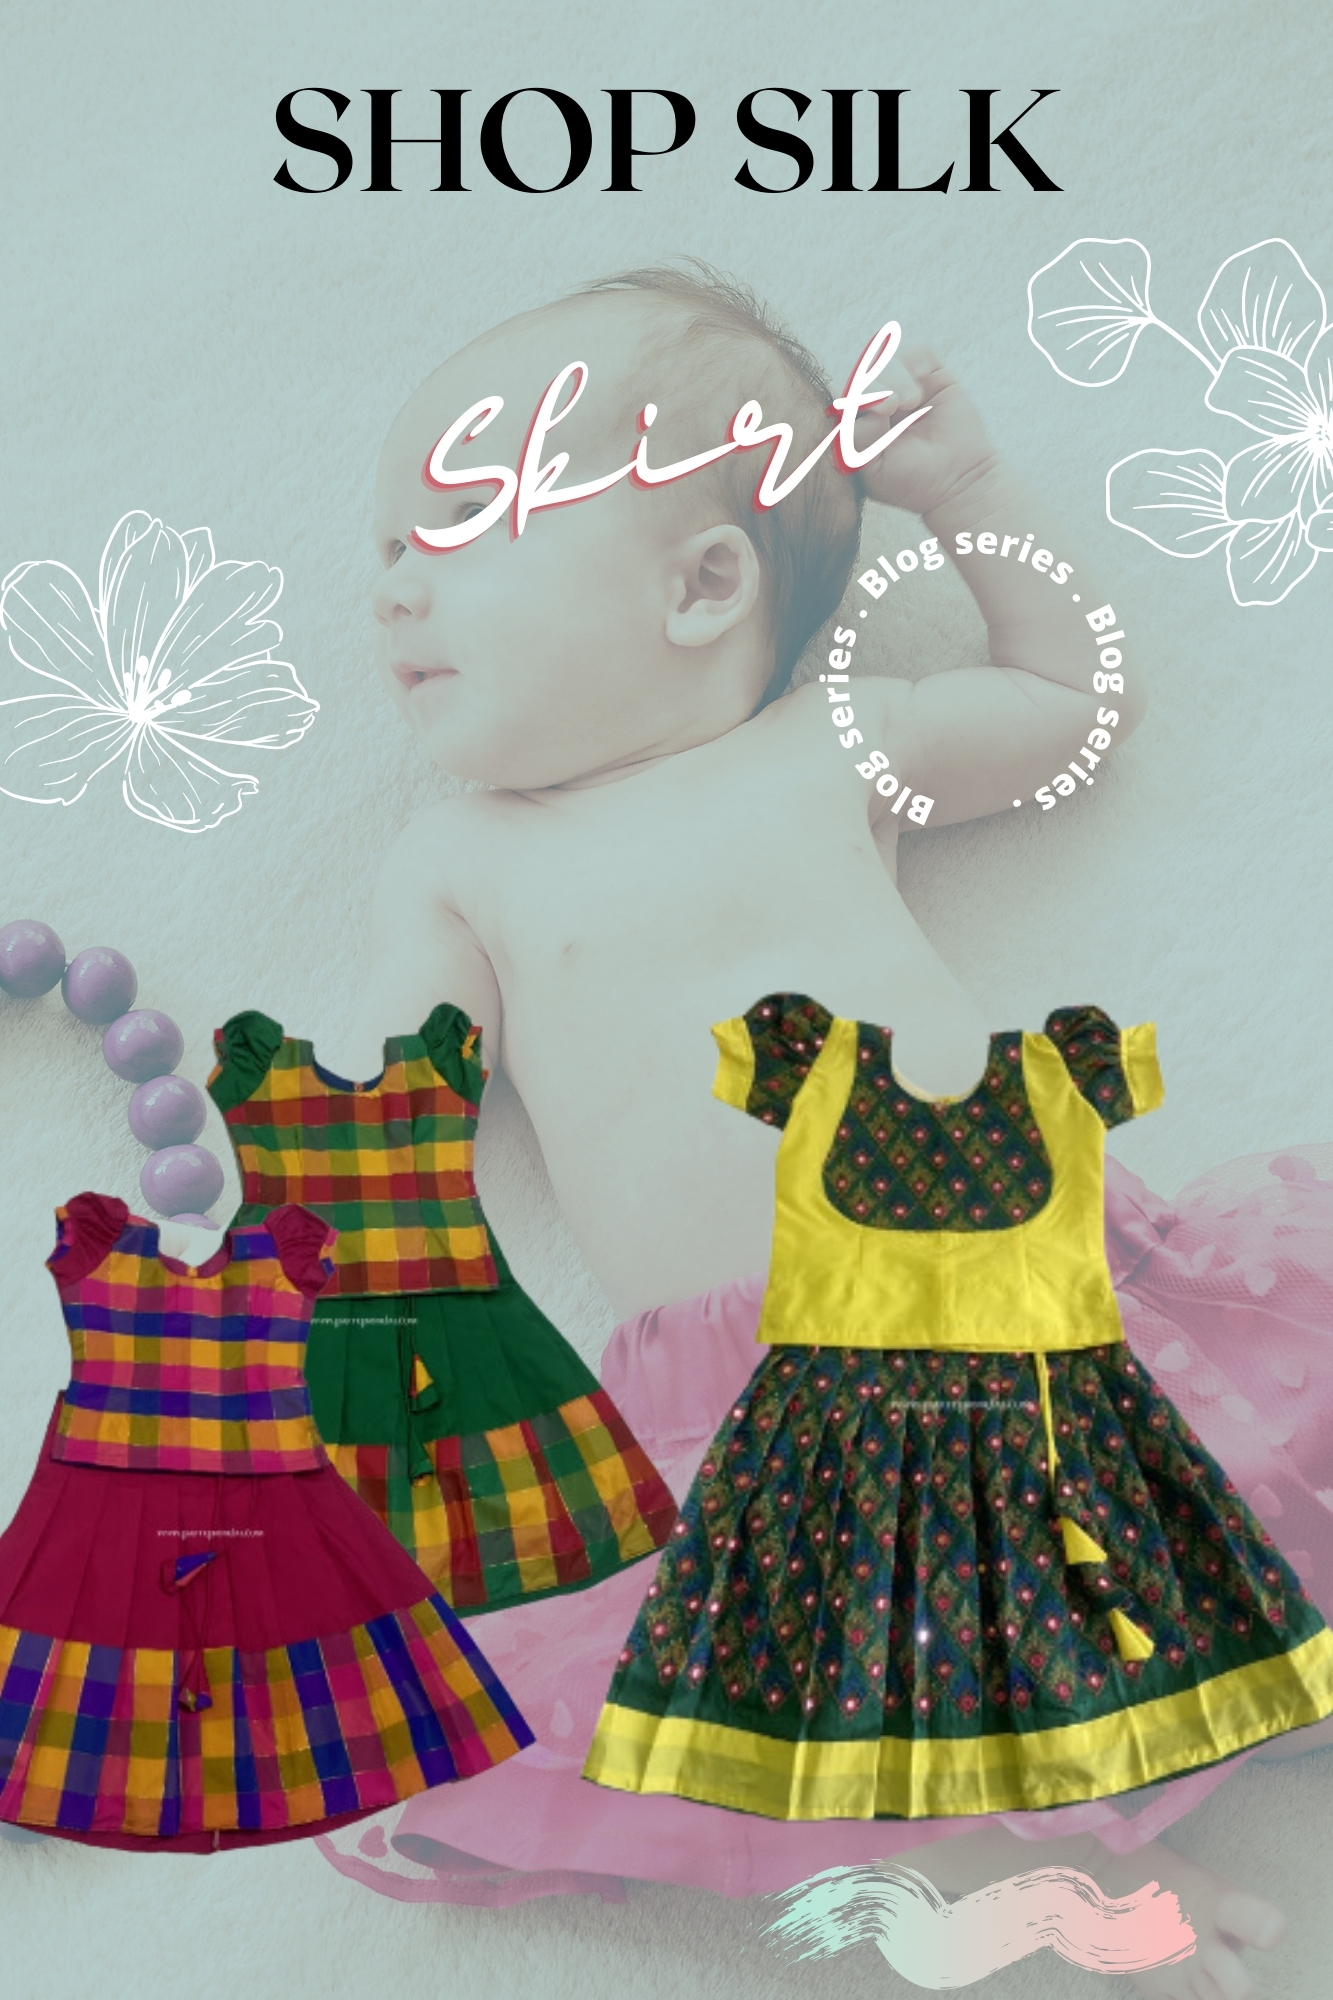 Silk Skirts for Kids: Style, Comfort, and Elegance Combined